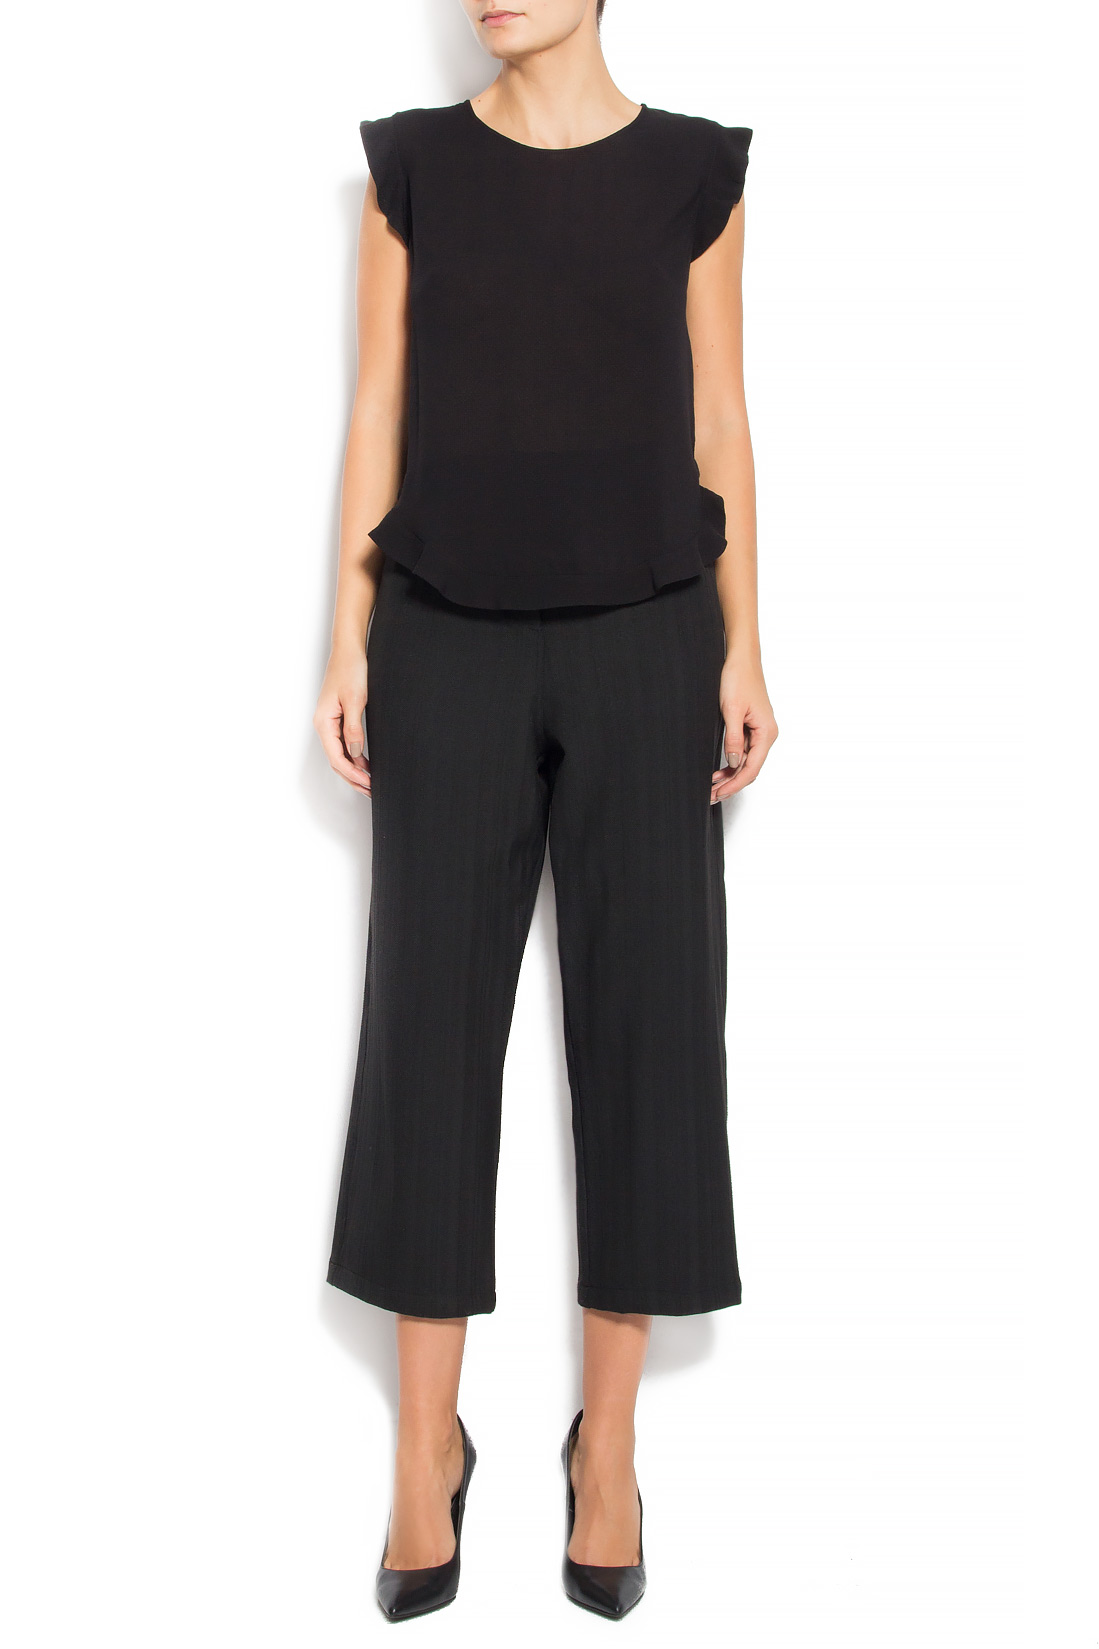 'Collected Trousers' wool-blend wide-leg culottes Studio Cabal image 0